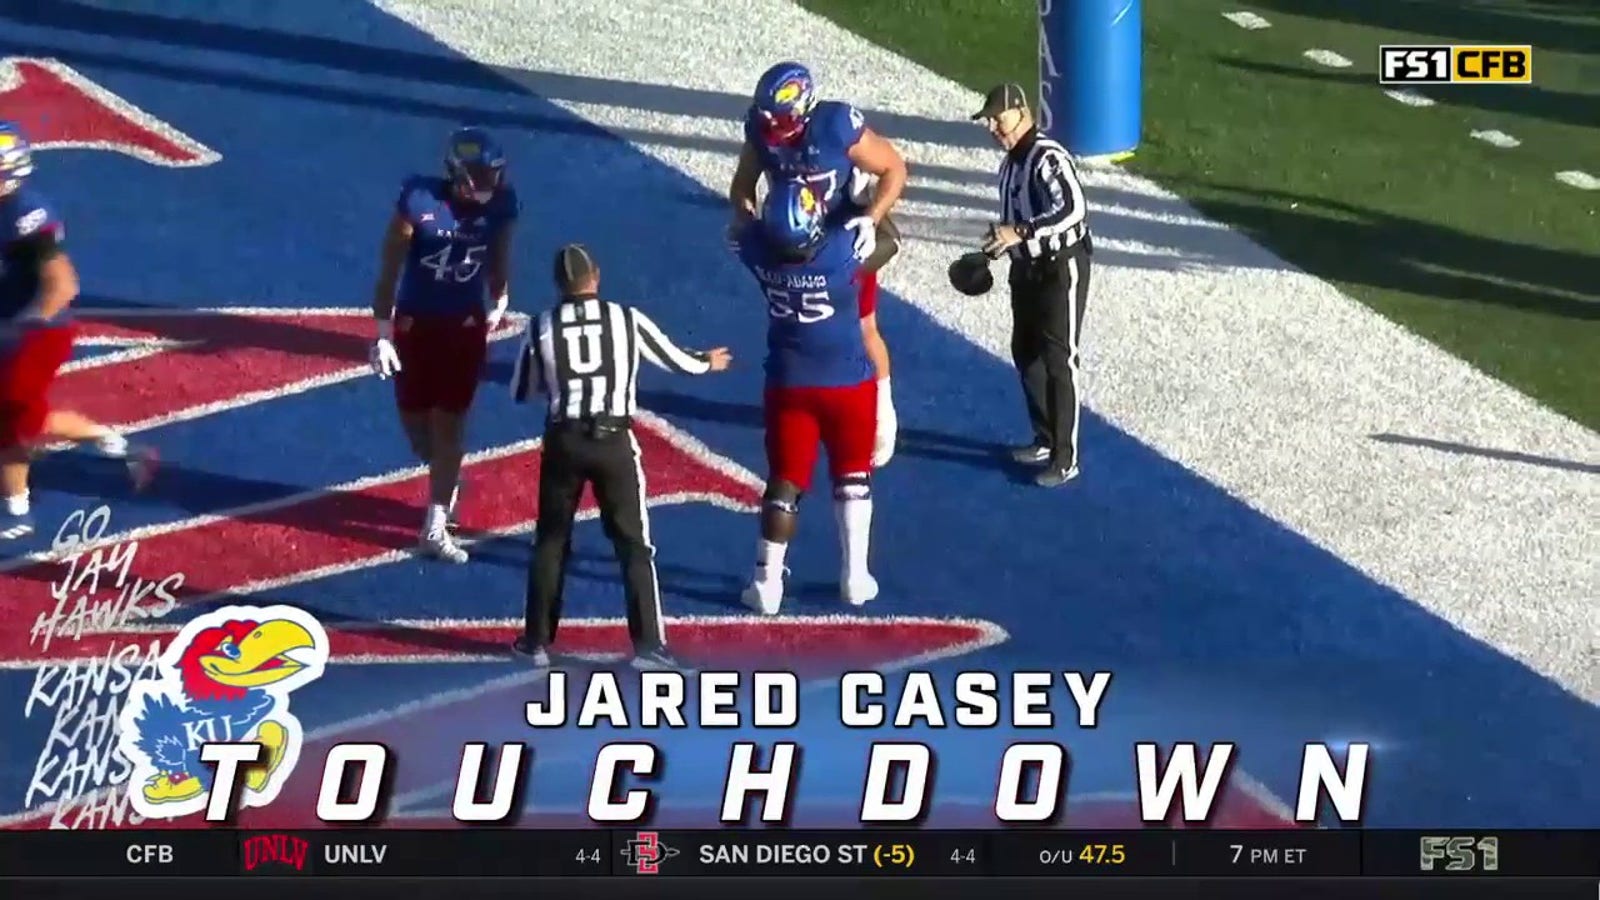 Jason Bean finds Jared Casey in the end zone for a 2-yard touchdown to extend Kansas' lead to 31-7